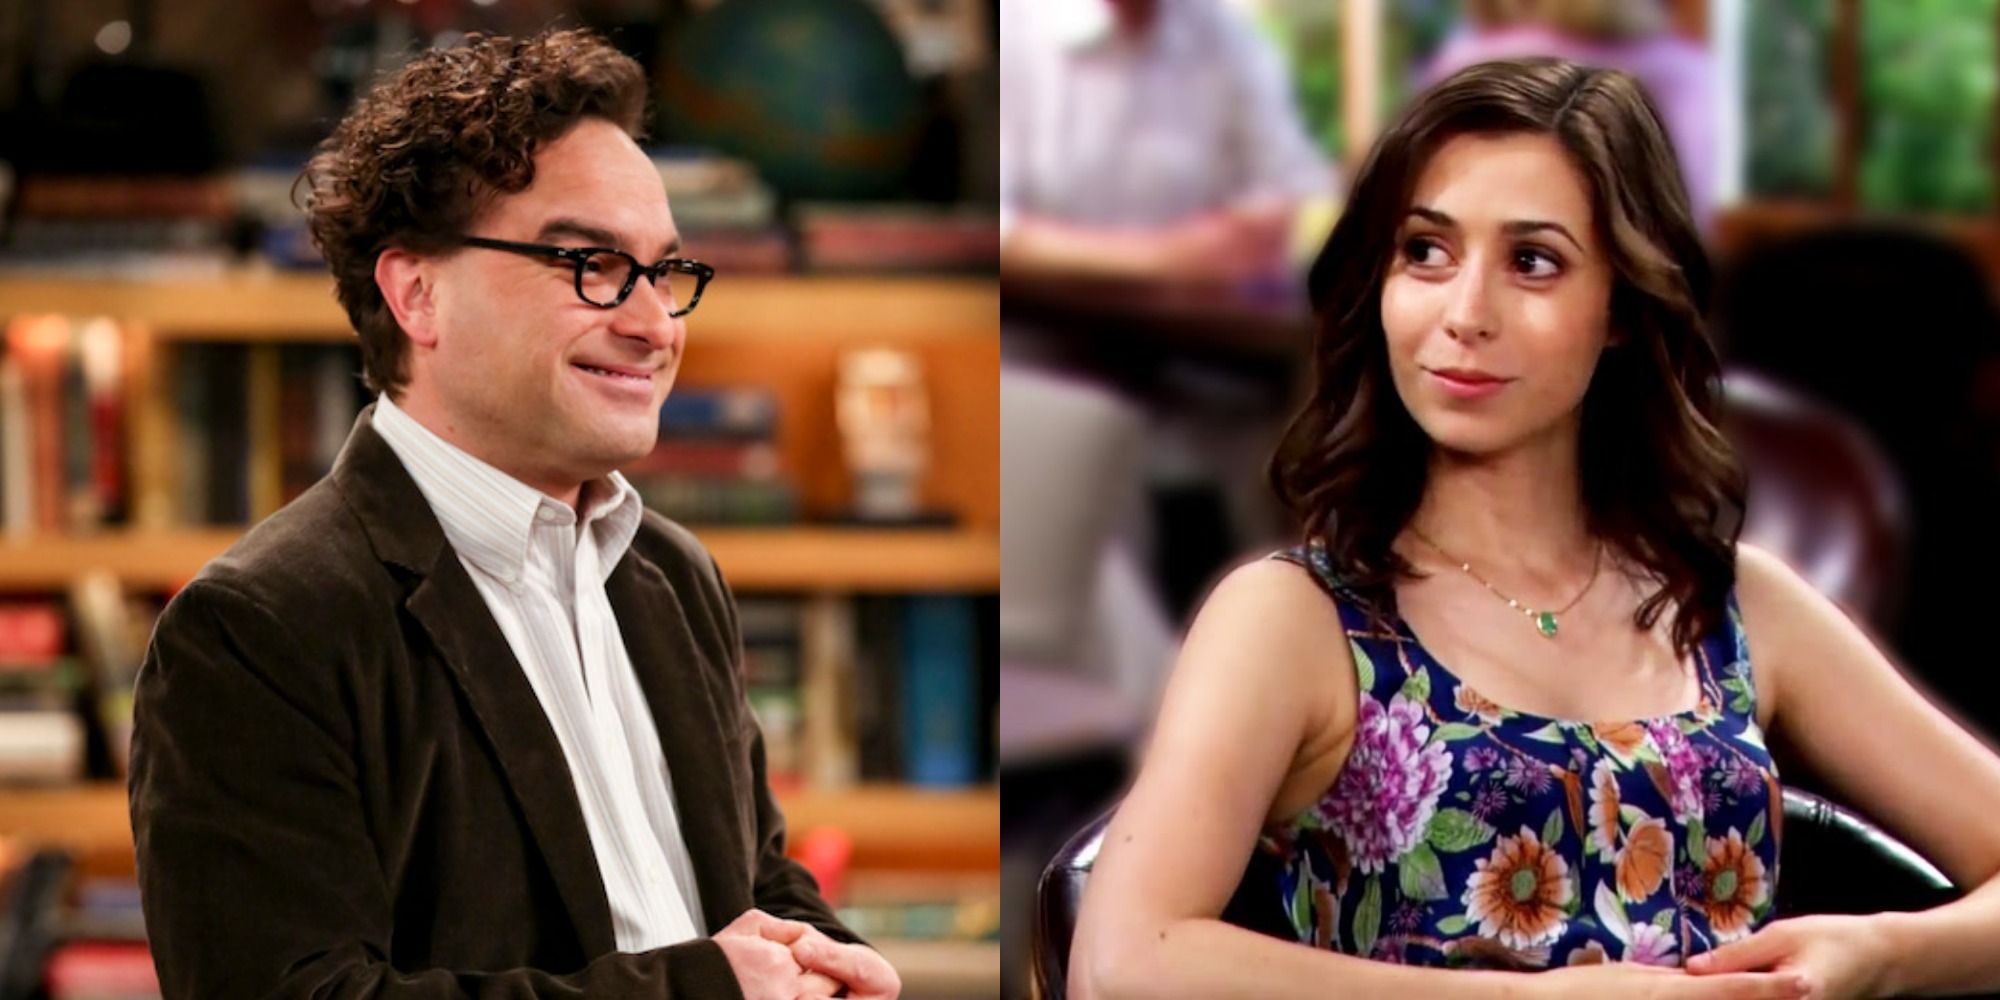 A split-screen image showing The Big Bang Theory's Leonard Hofstadter and How I Met Your Mother's Tracy McConnell-Mosby